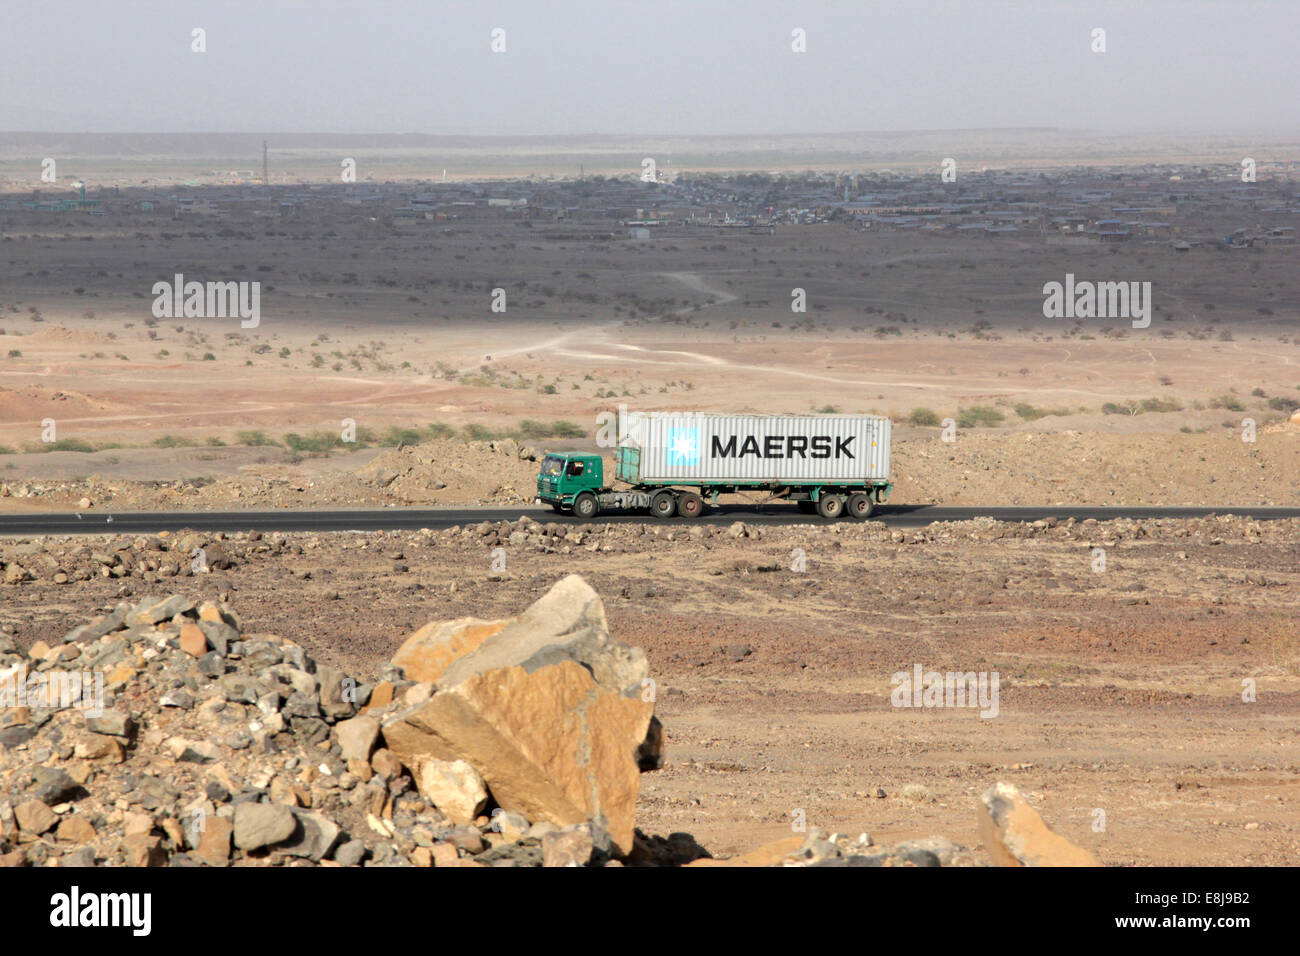 Container truck on the Ethiopia-Djibouti highway Stock Photo